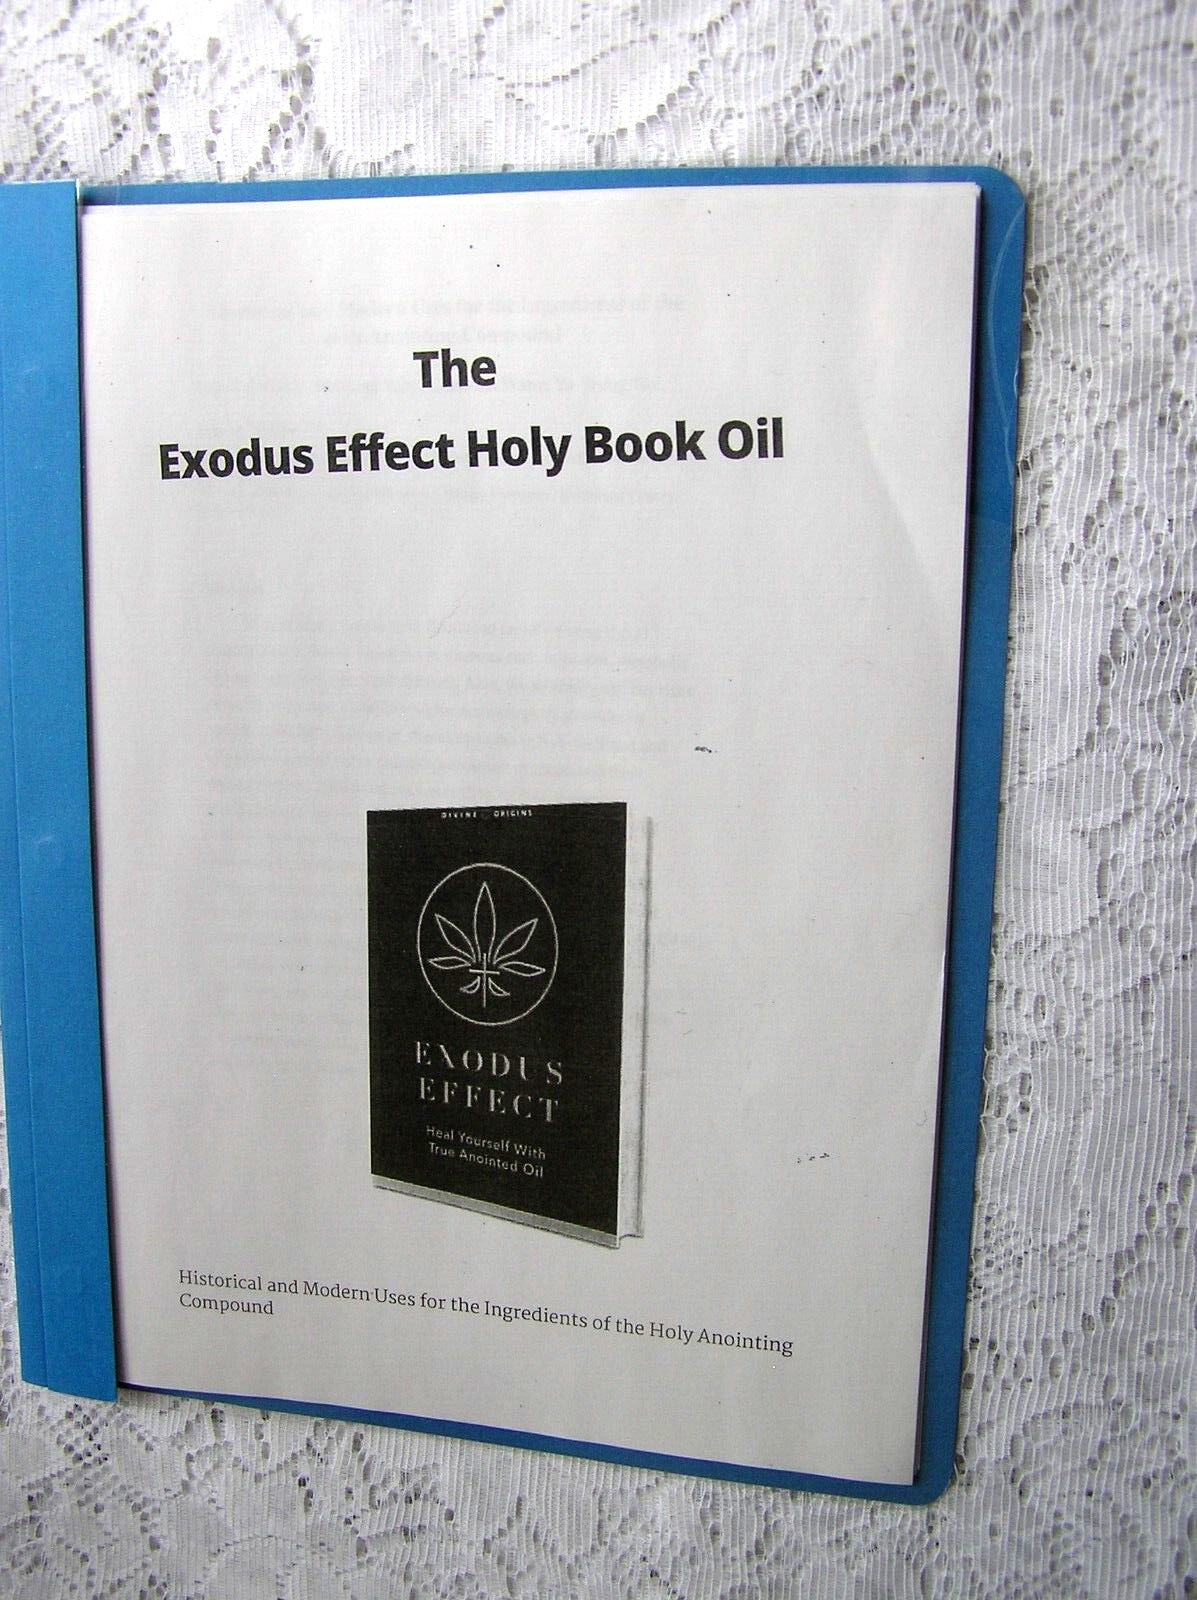 The Exodus Effect - Holy Book Oil - The Holy Anointing Oil Compound With Recipes